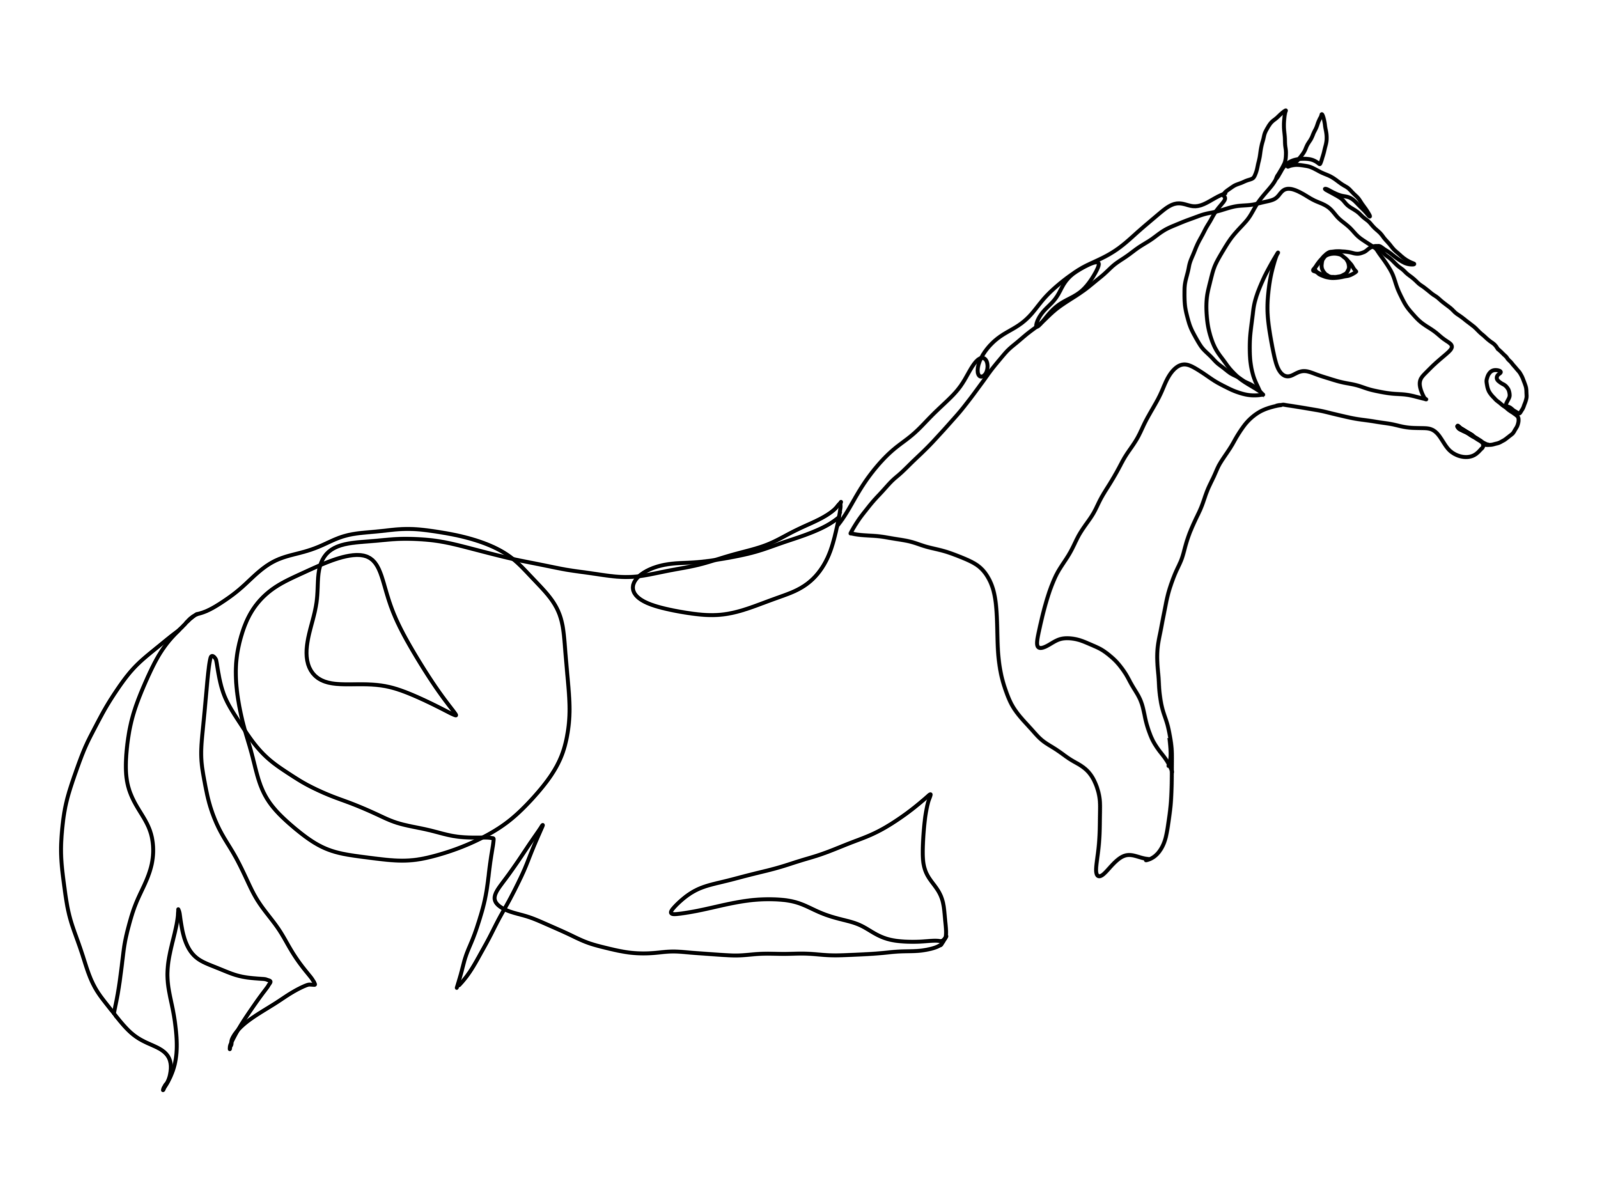 Buy CUSTOM HORSE Portrait One Line Drawing Horse and Rider Gift Online in  India  Etsy